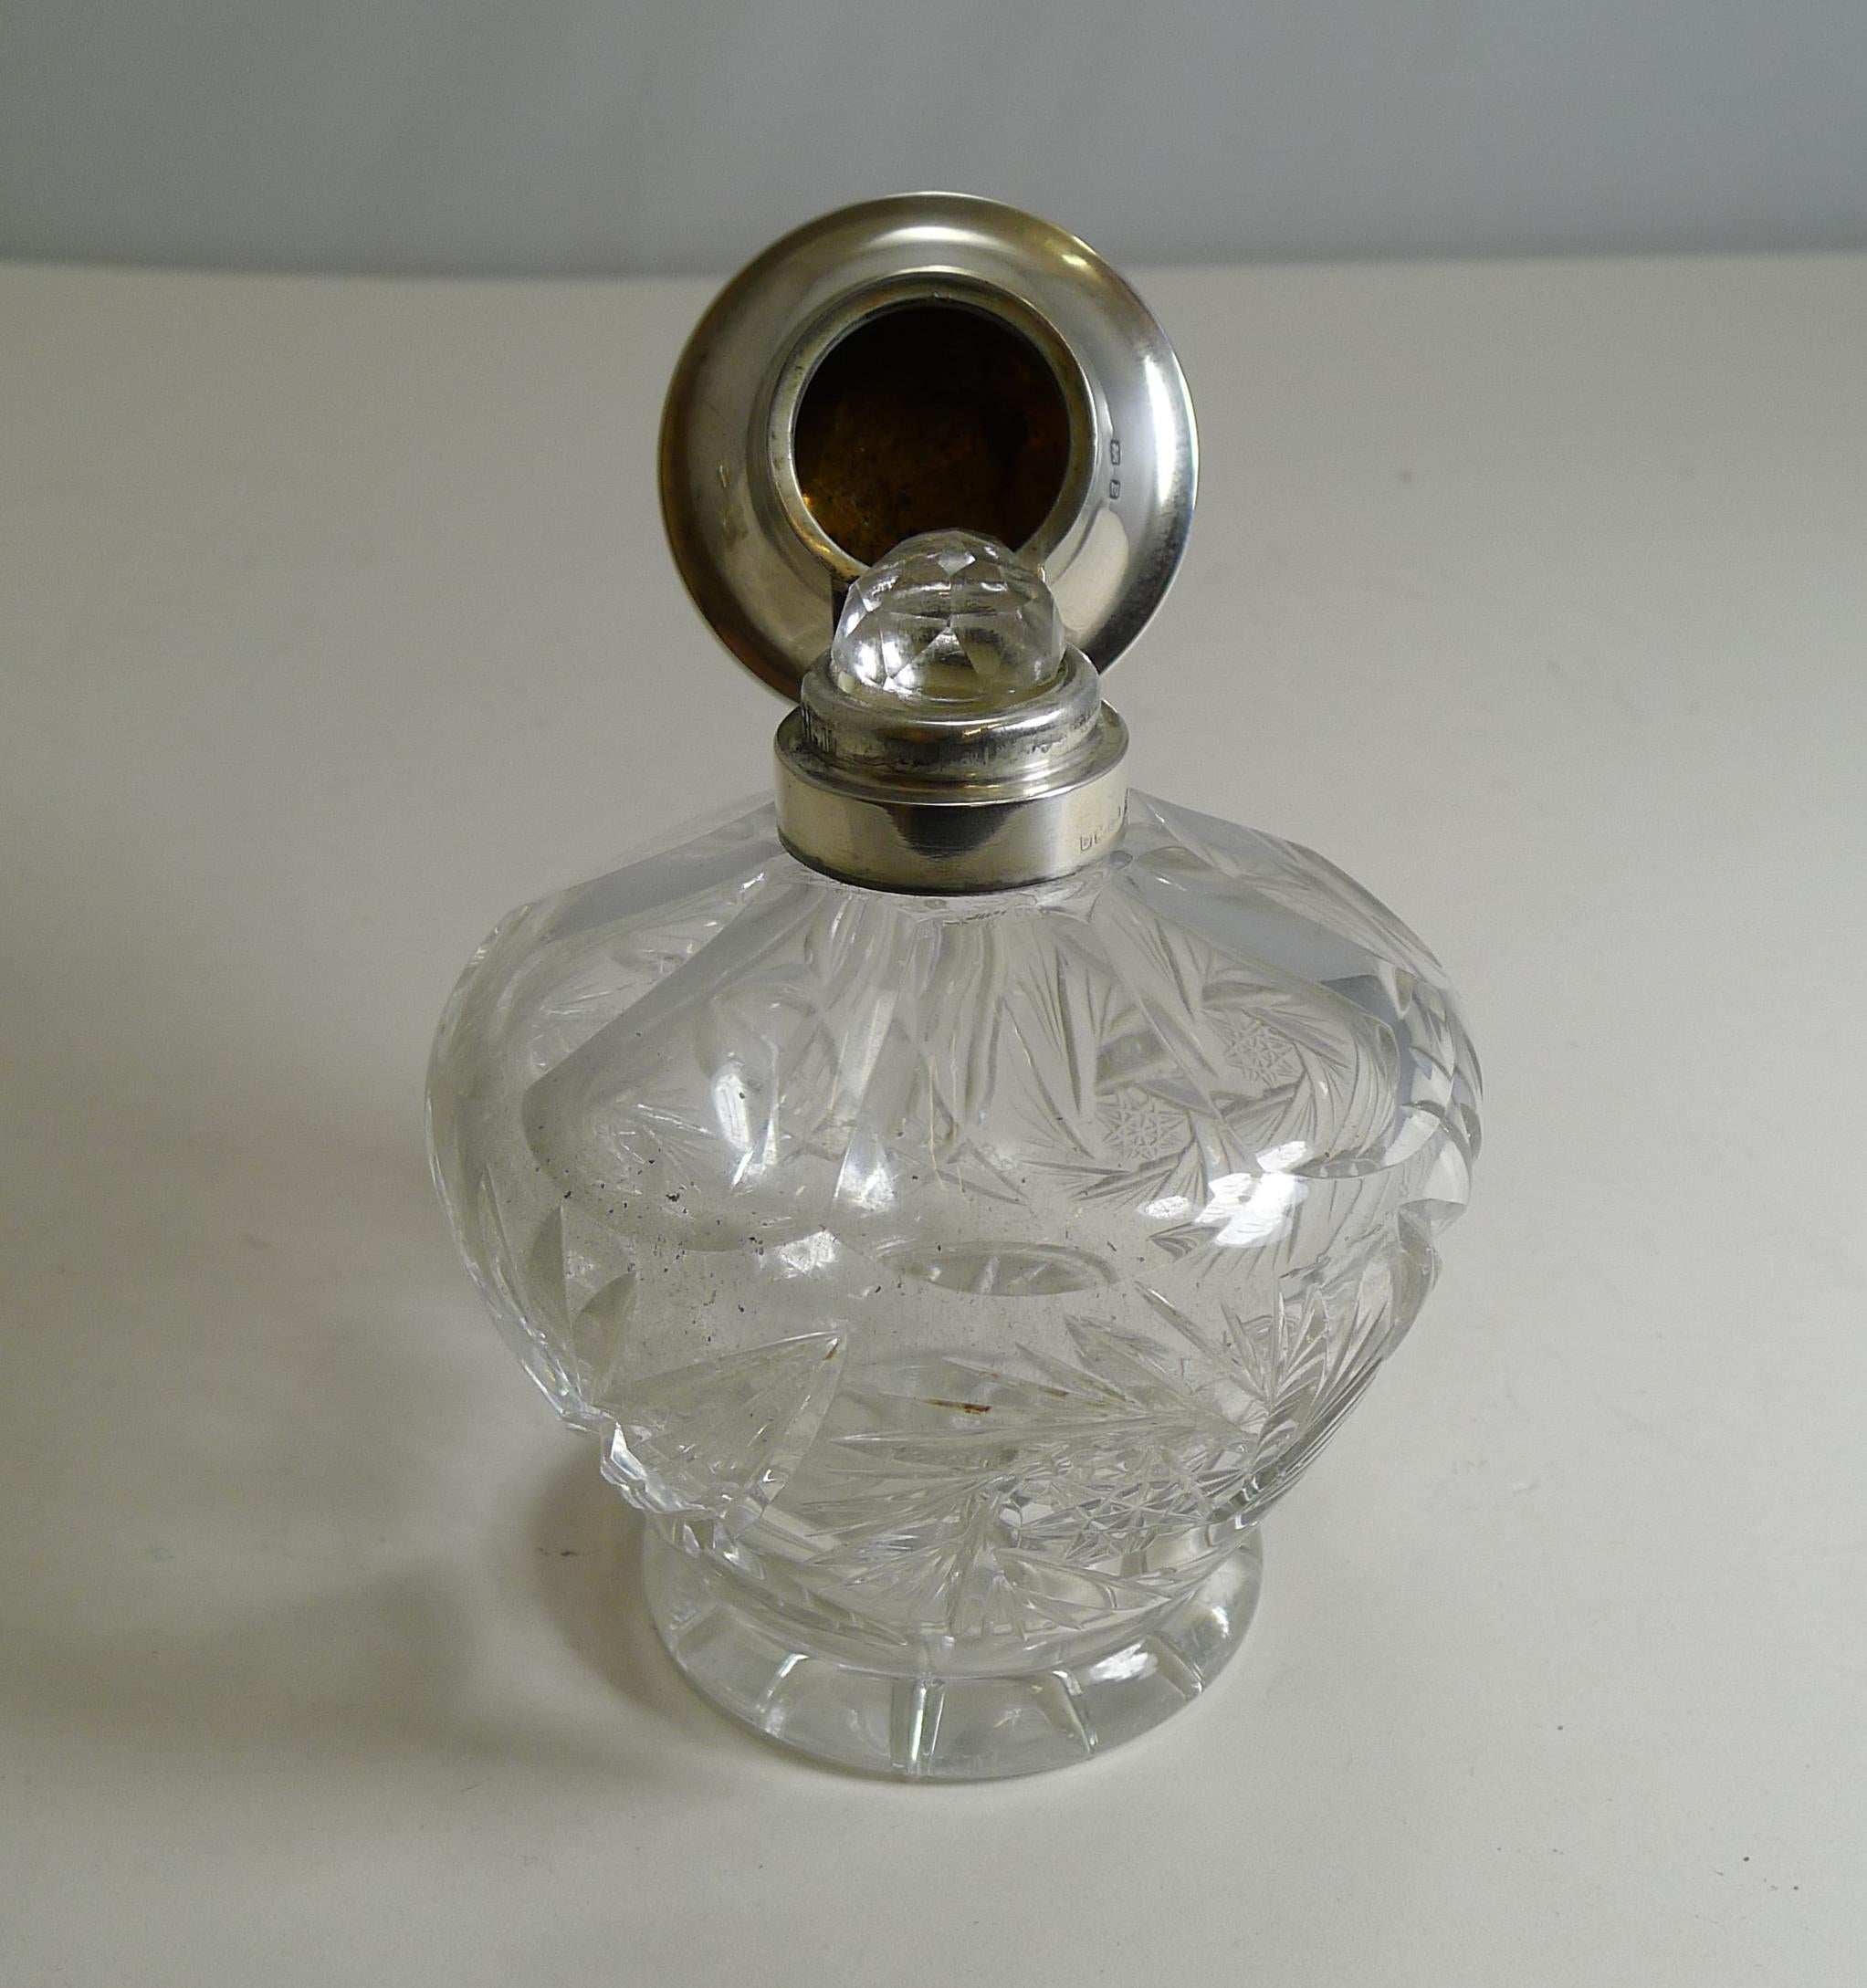 Early 20th Century Cut Crystal Perfume Bottle, English Sterling Silver and Pink Guilloche Enamel